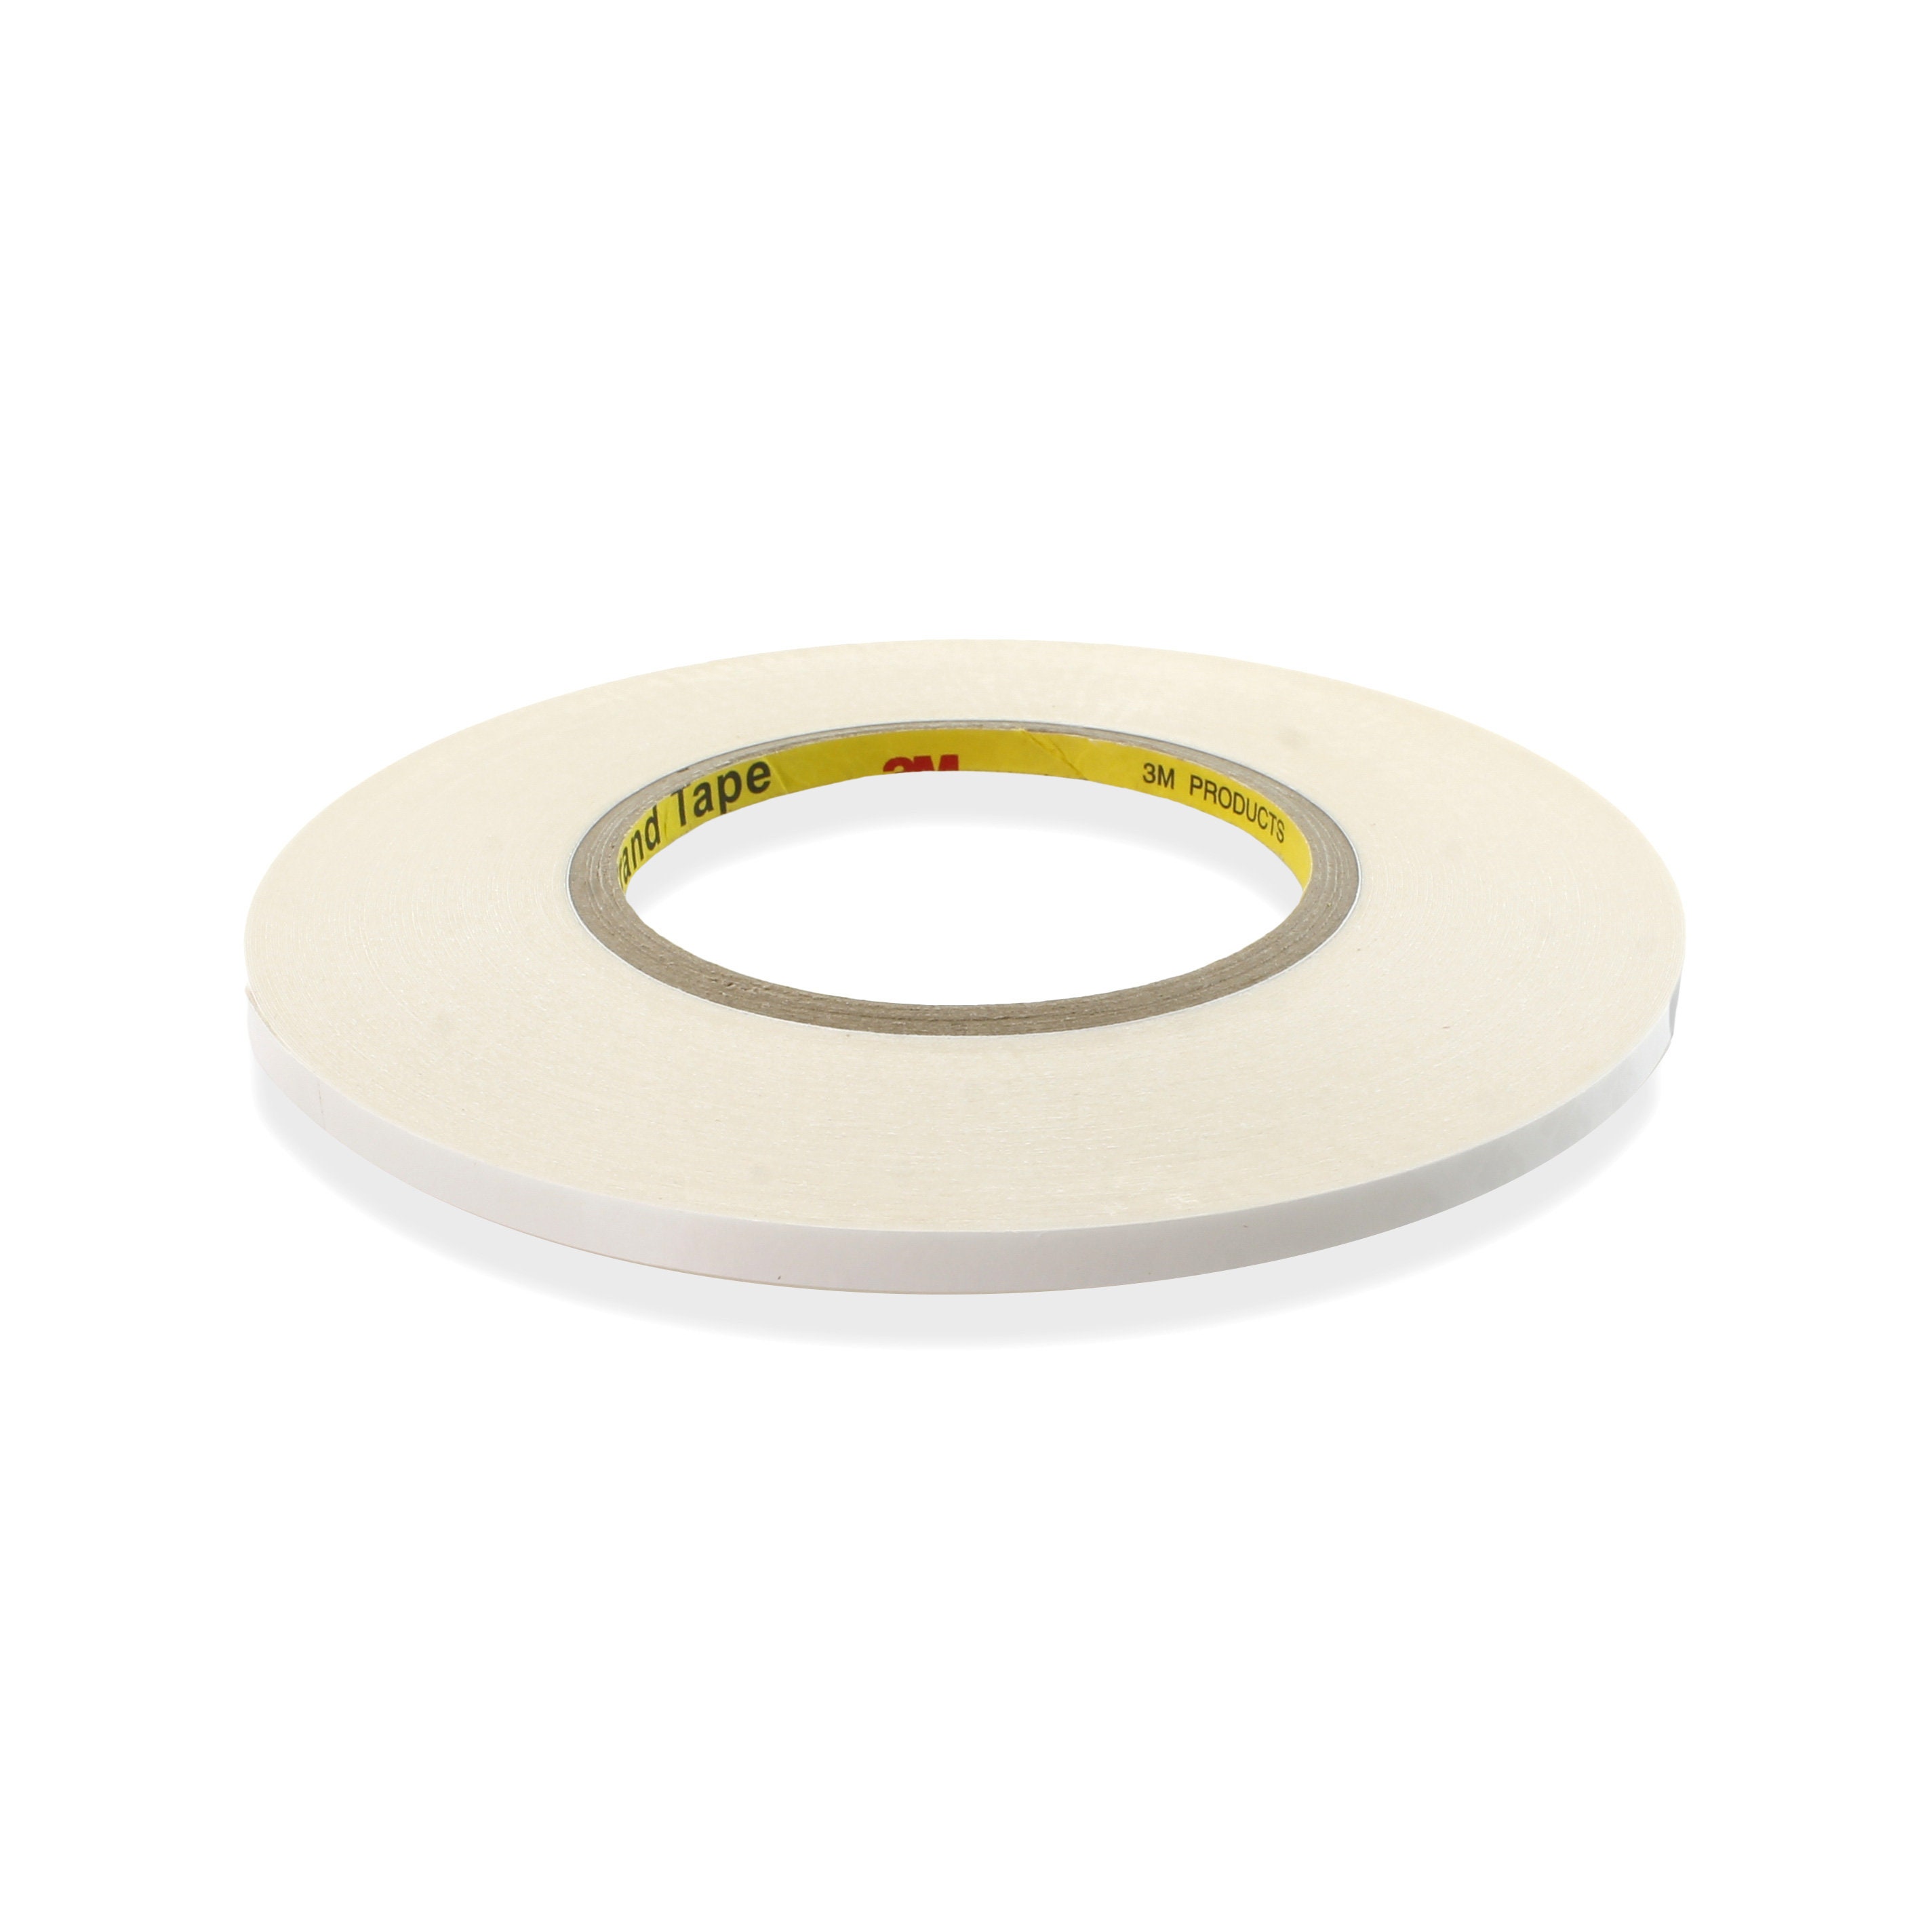 RS PRO White Double Sided Paper Tape, Non-Woven Backing, 12mm x 50m